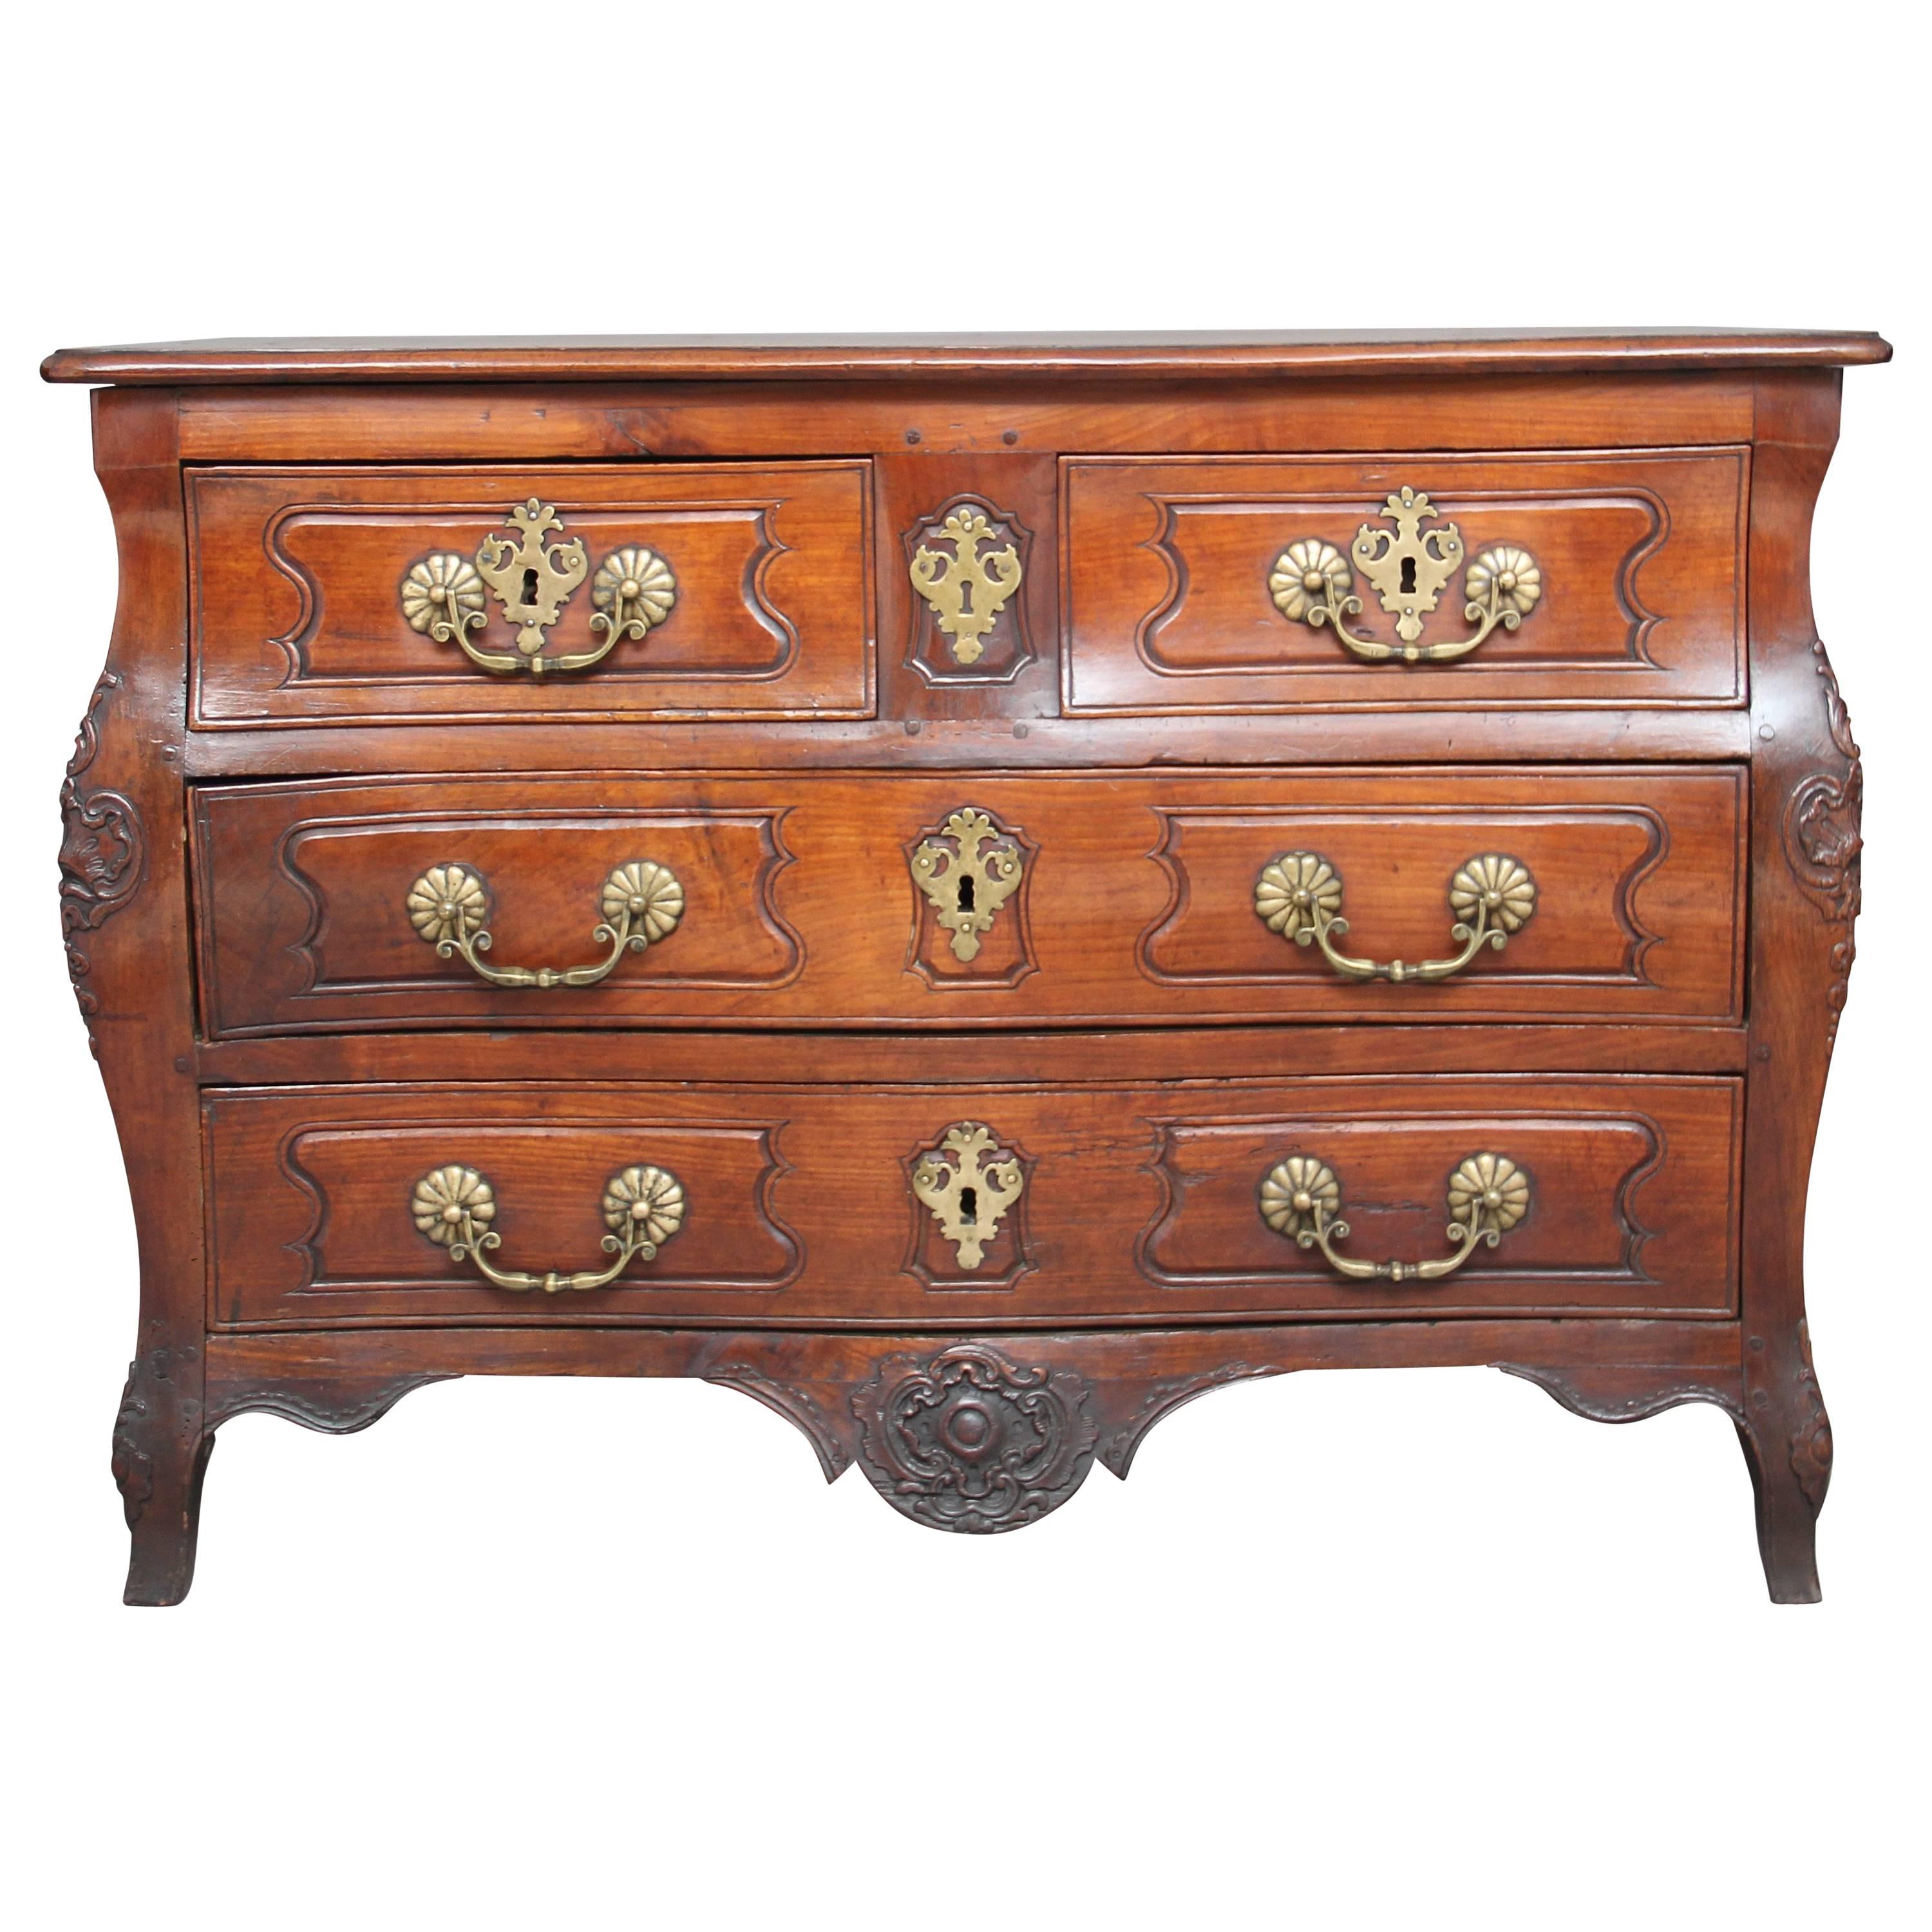 18th Century French Cherry Wood Commode